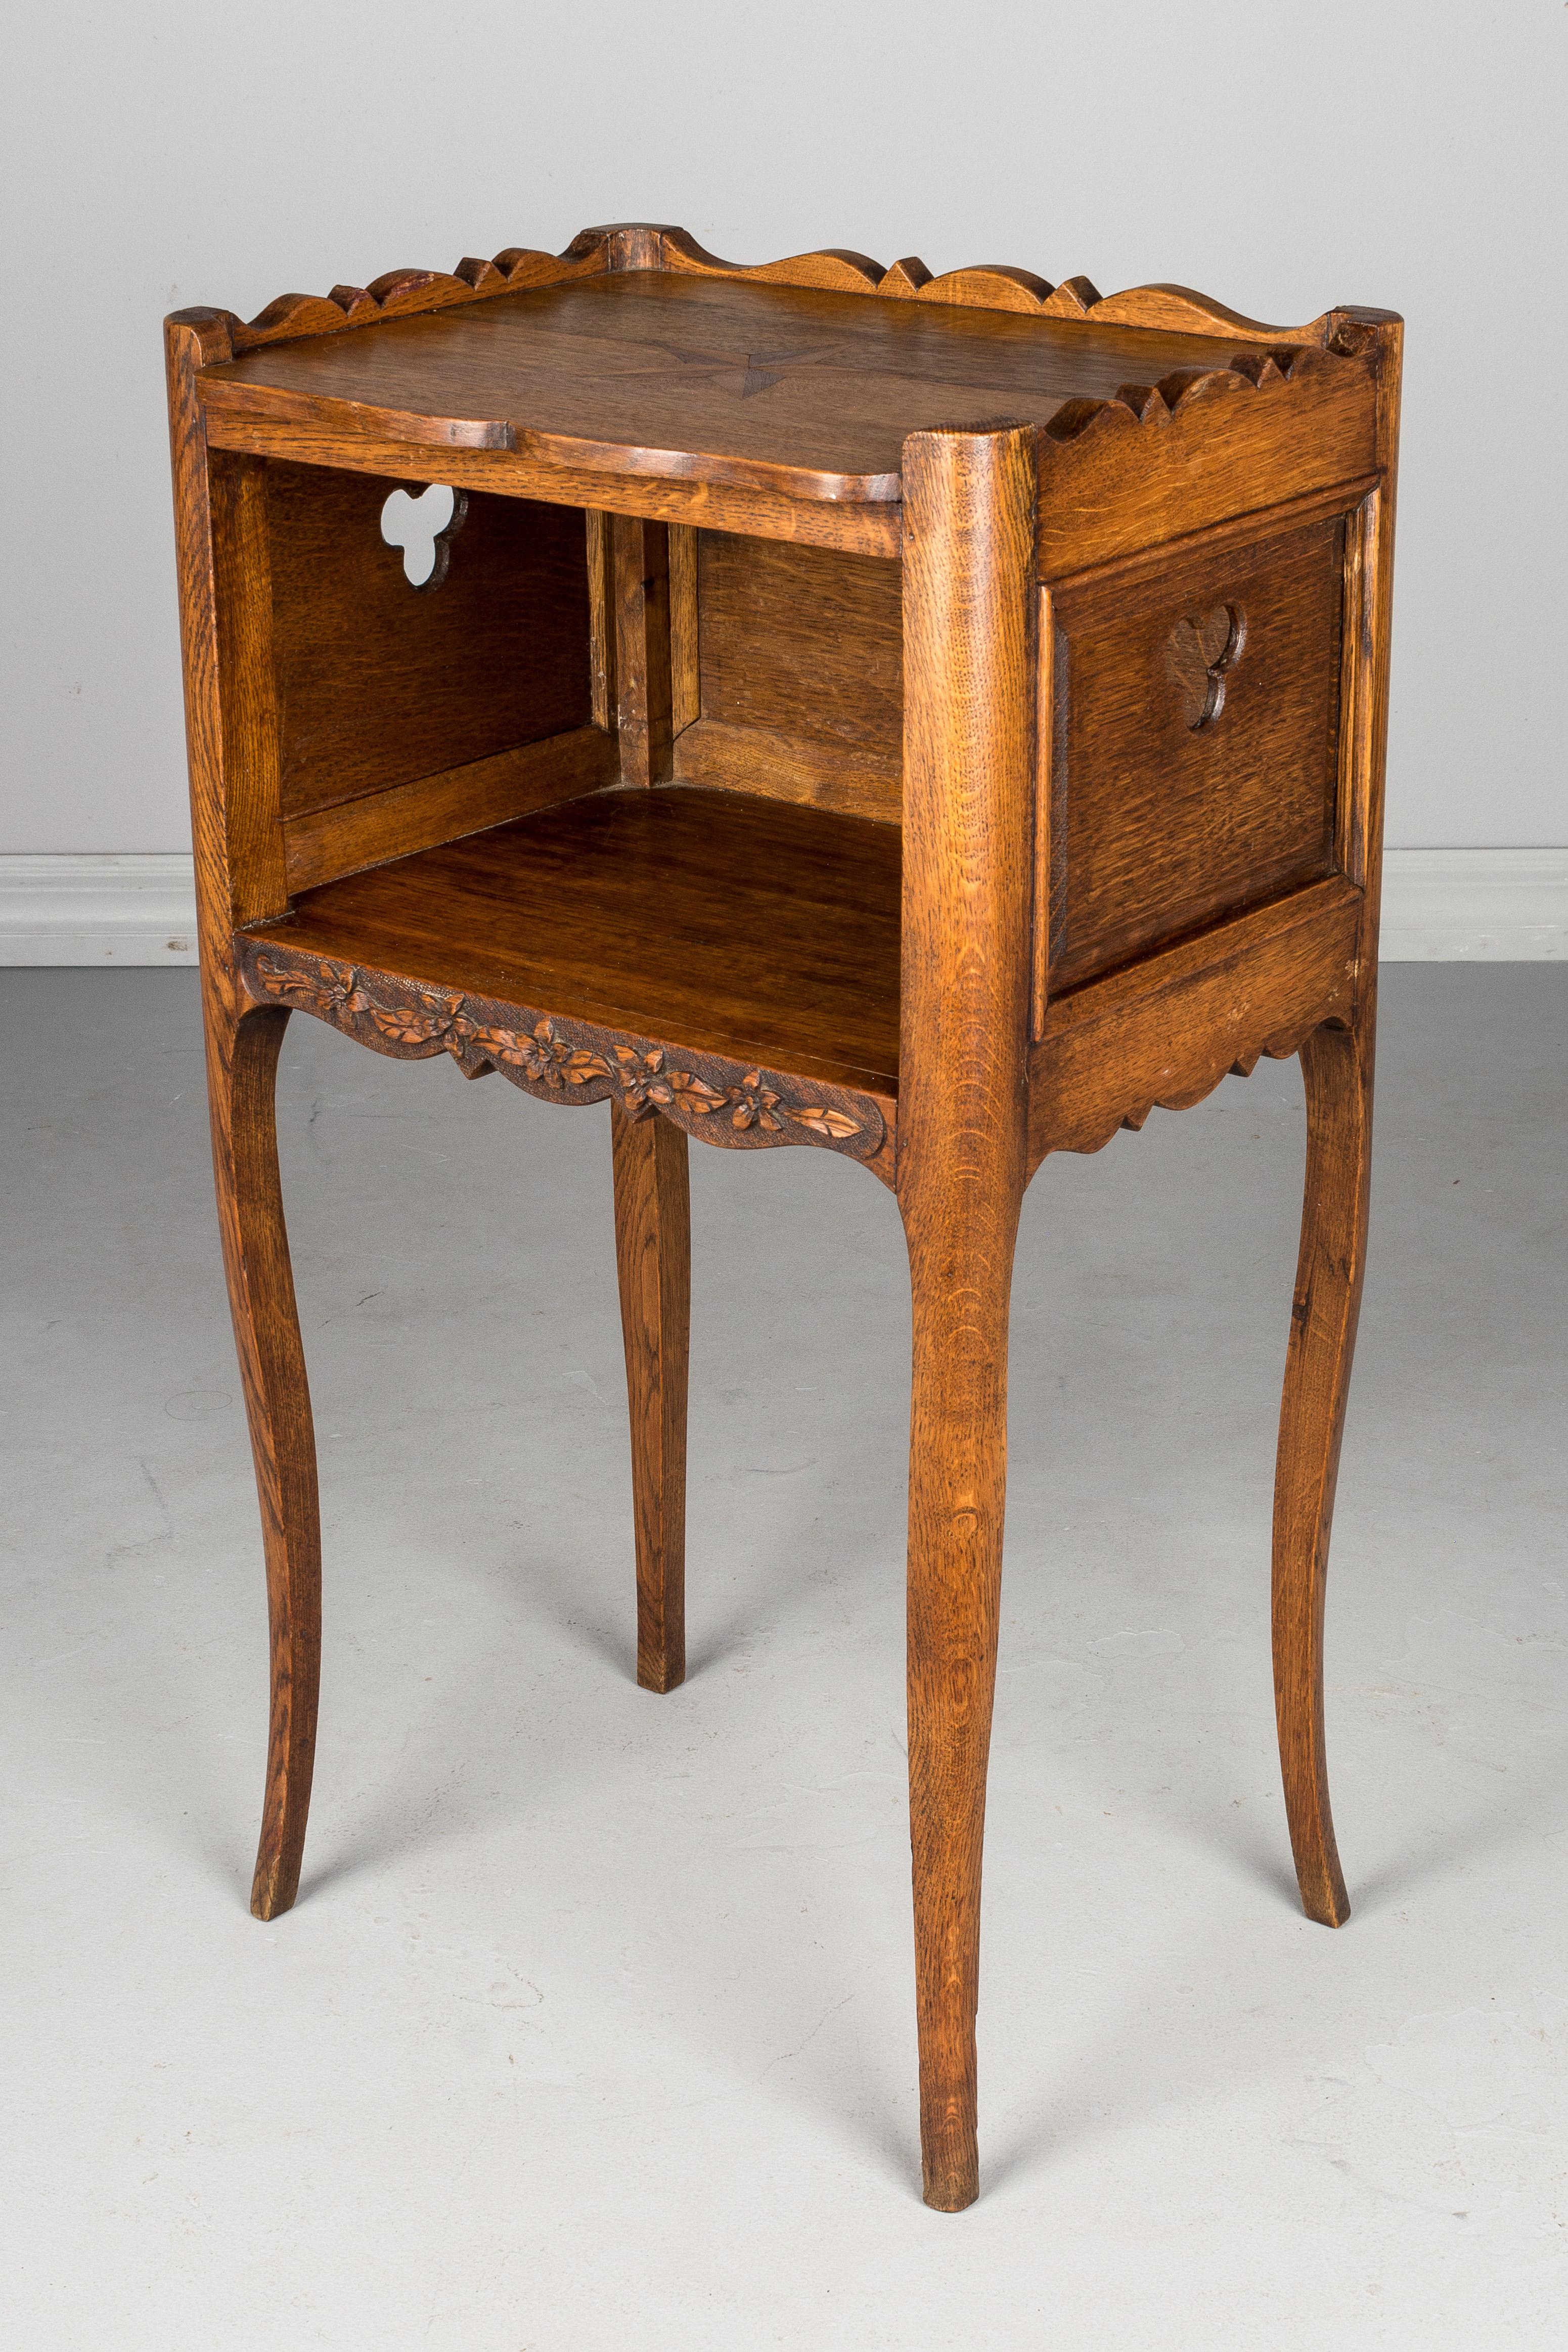 A Louis XV style country French side table or nightstand made of solid oak, with pierced clover shaped cut-outs on the on the sides and hand carved floral decoration. Marquetry star on the top surrounded by a scalloped gallery. Slender curved legs.